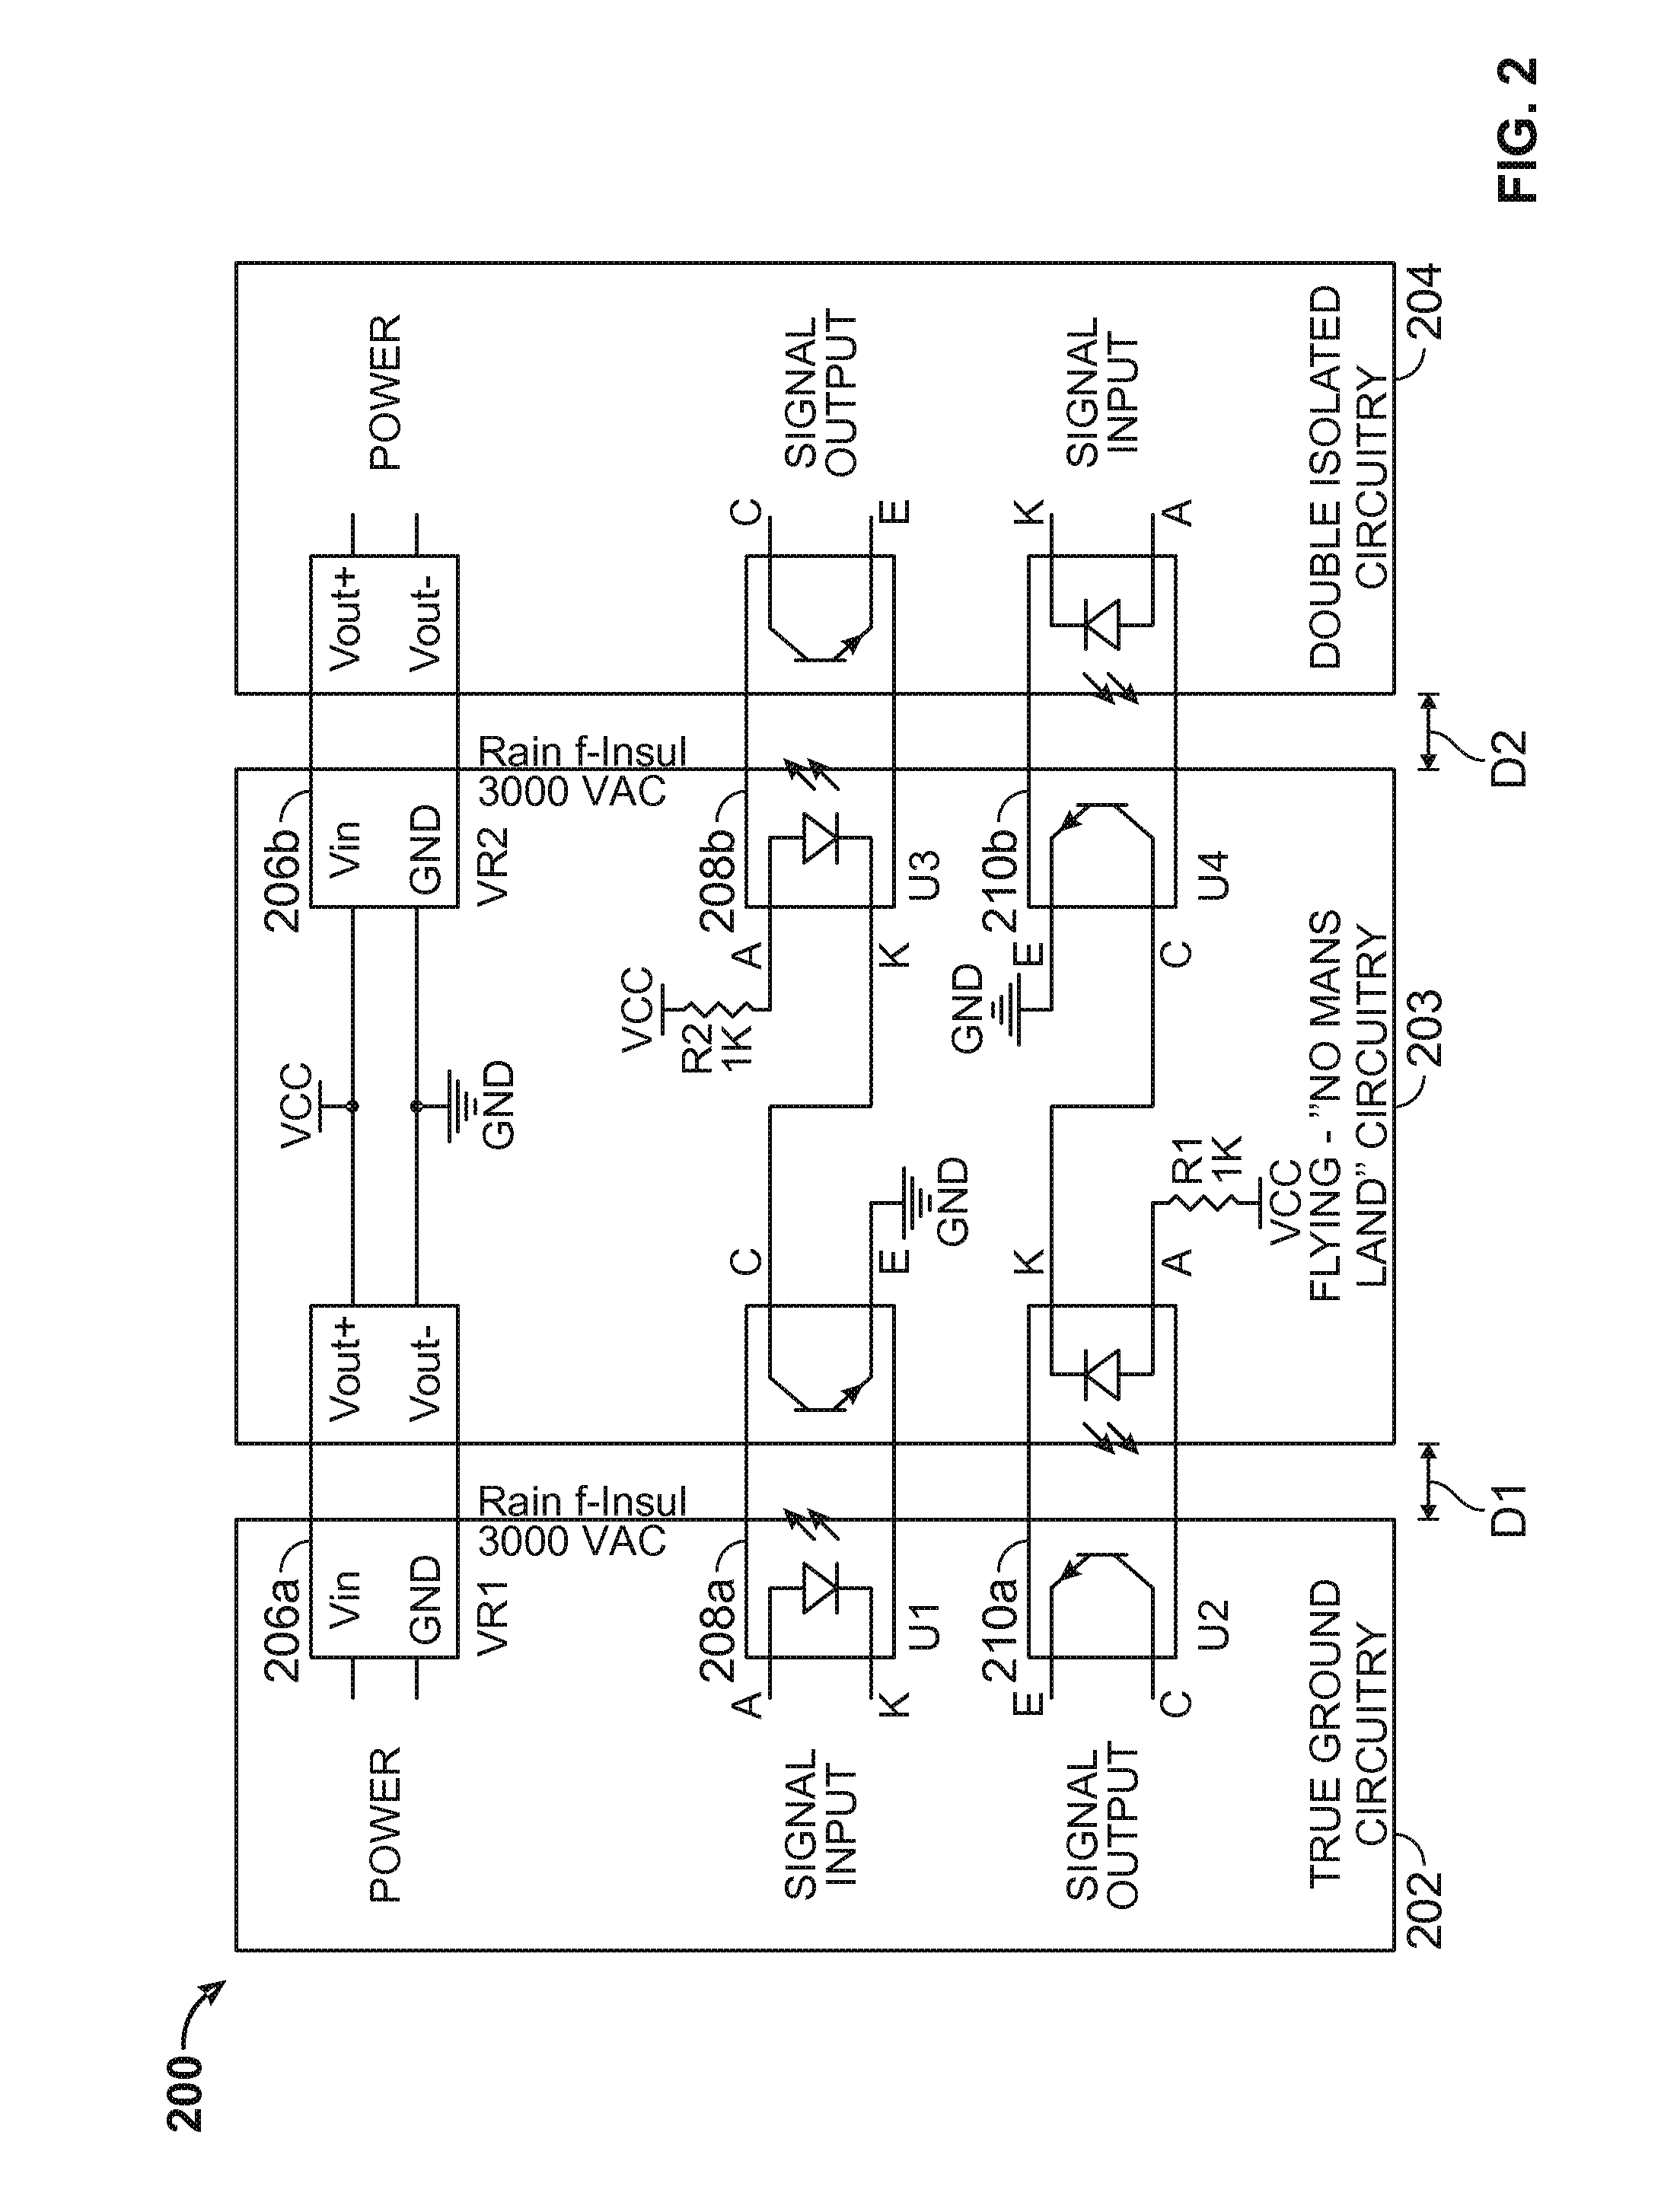 Systems and methods for obtaining large creepage isolation on printed circuit boards